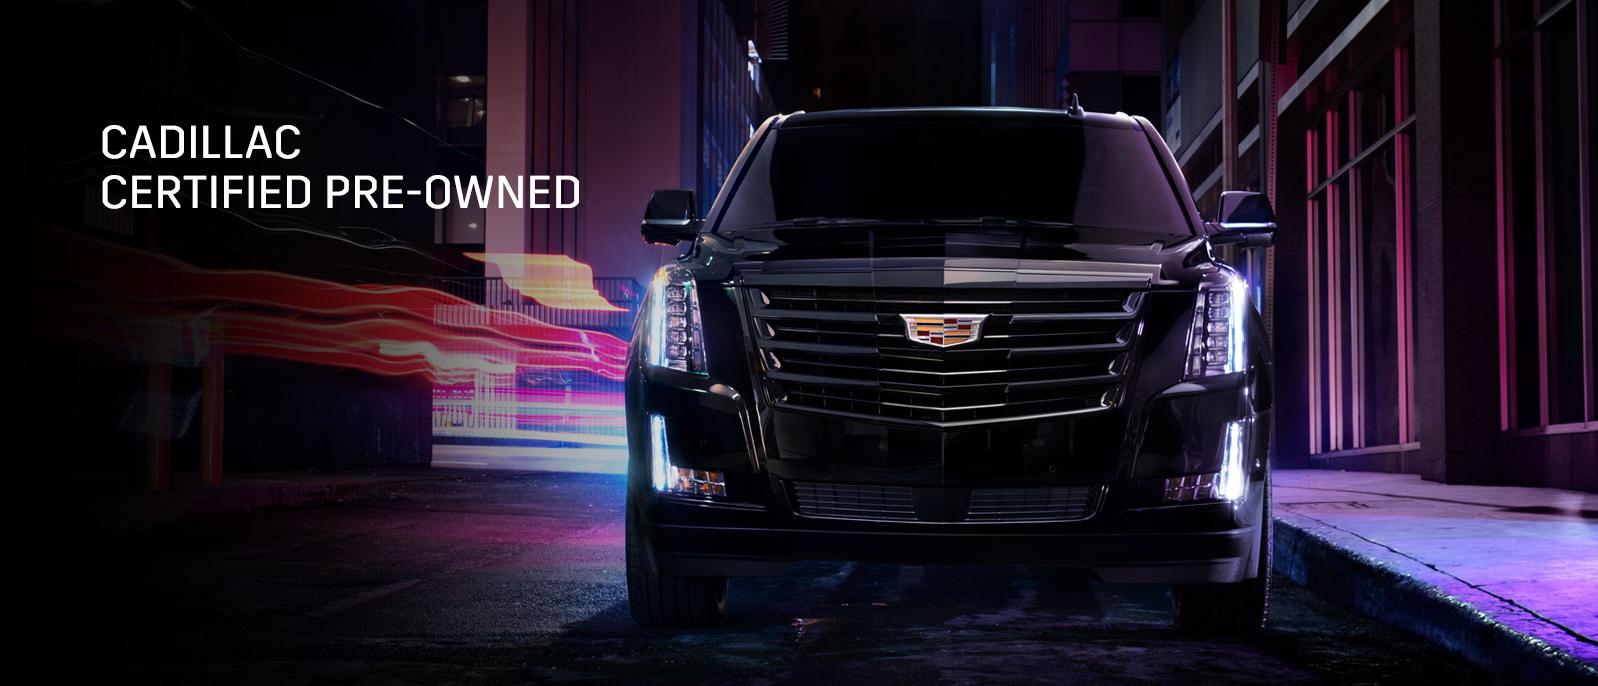 Cadillac Certified Pre-Owned